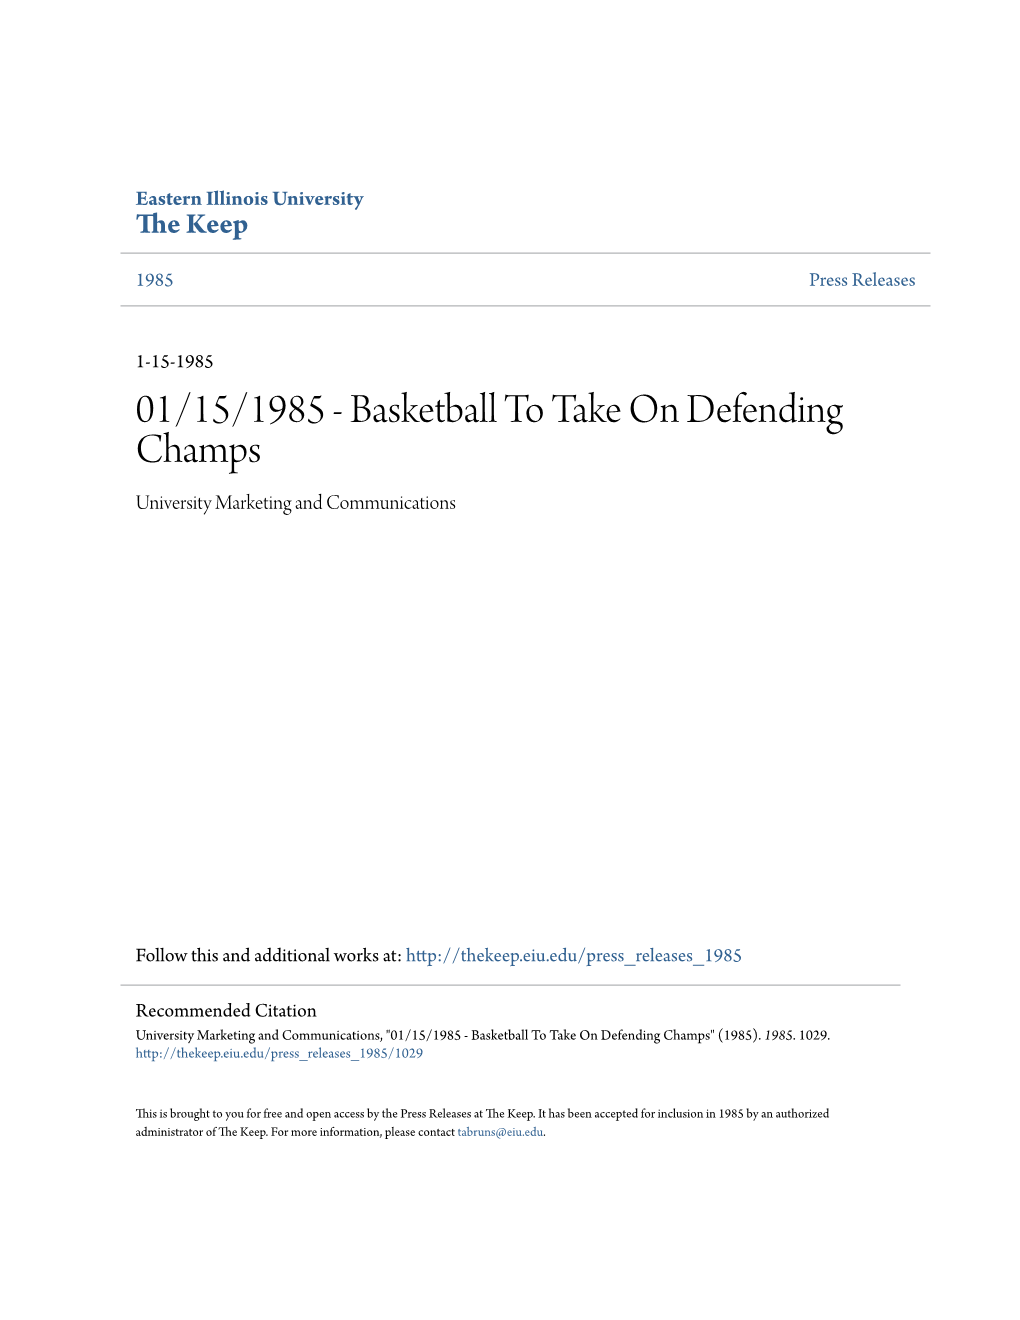 01/15/1985 - Basketball to Take on Defending Champs University Marketing and Communications